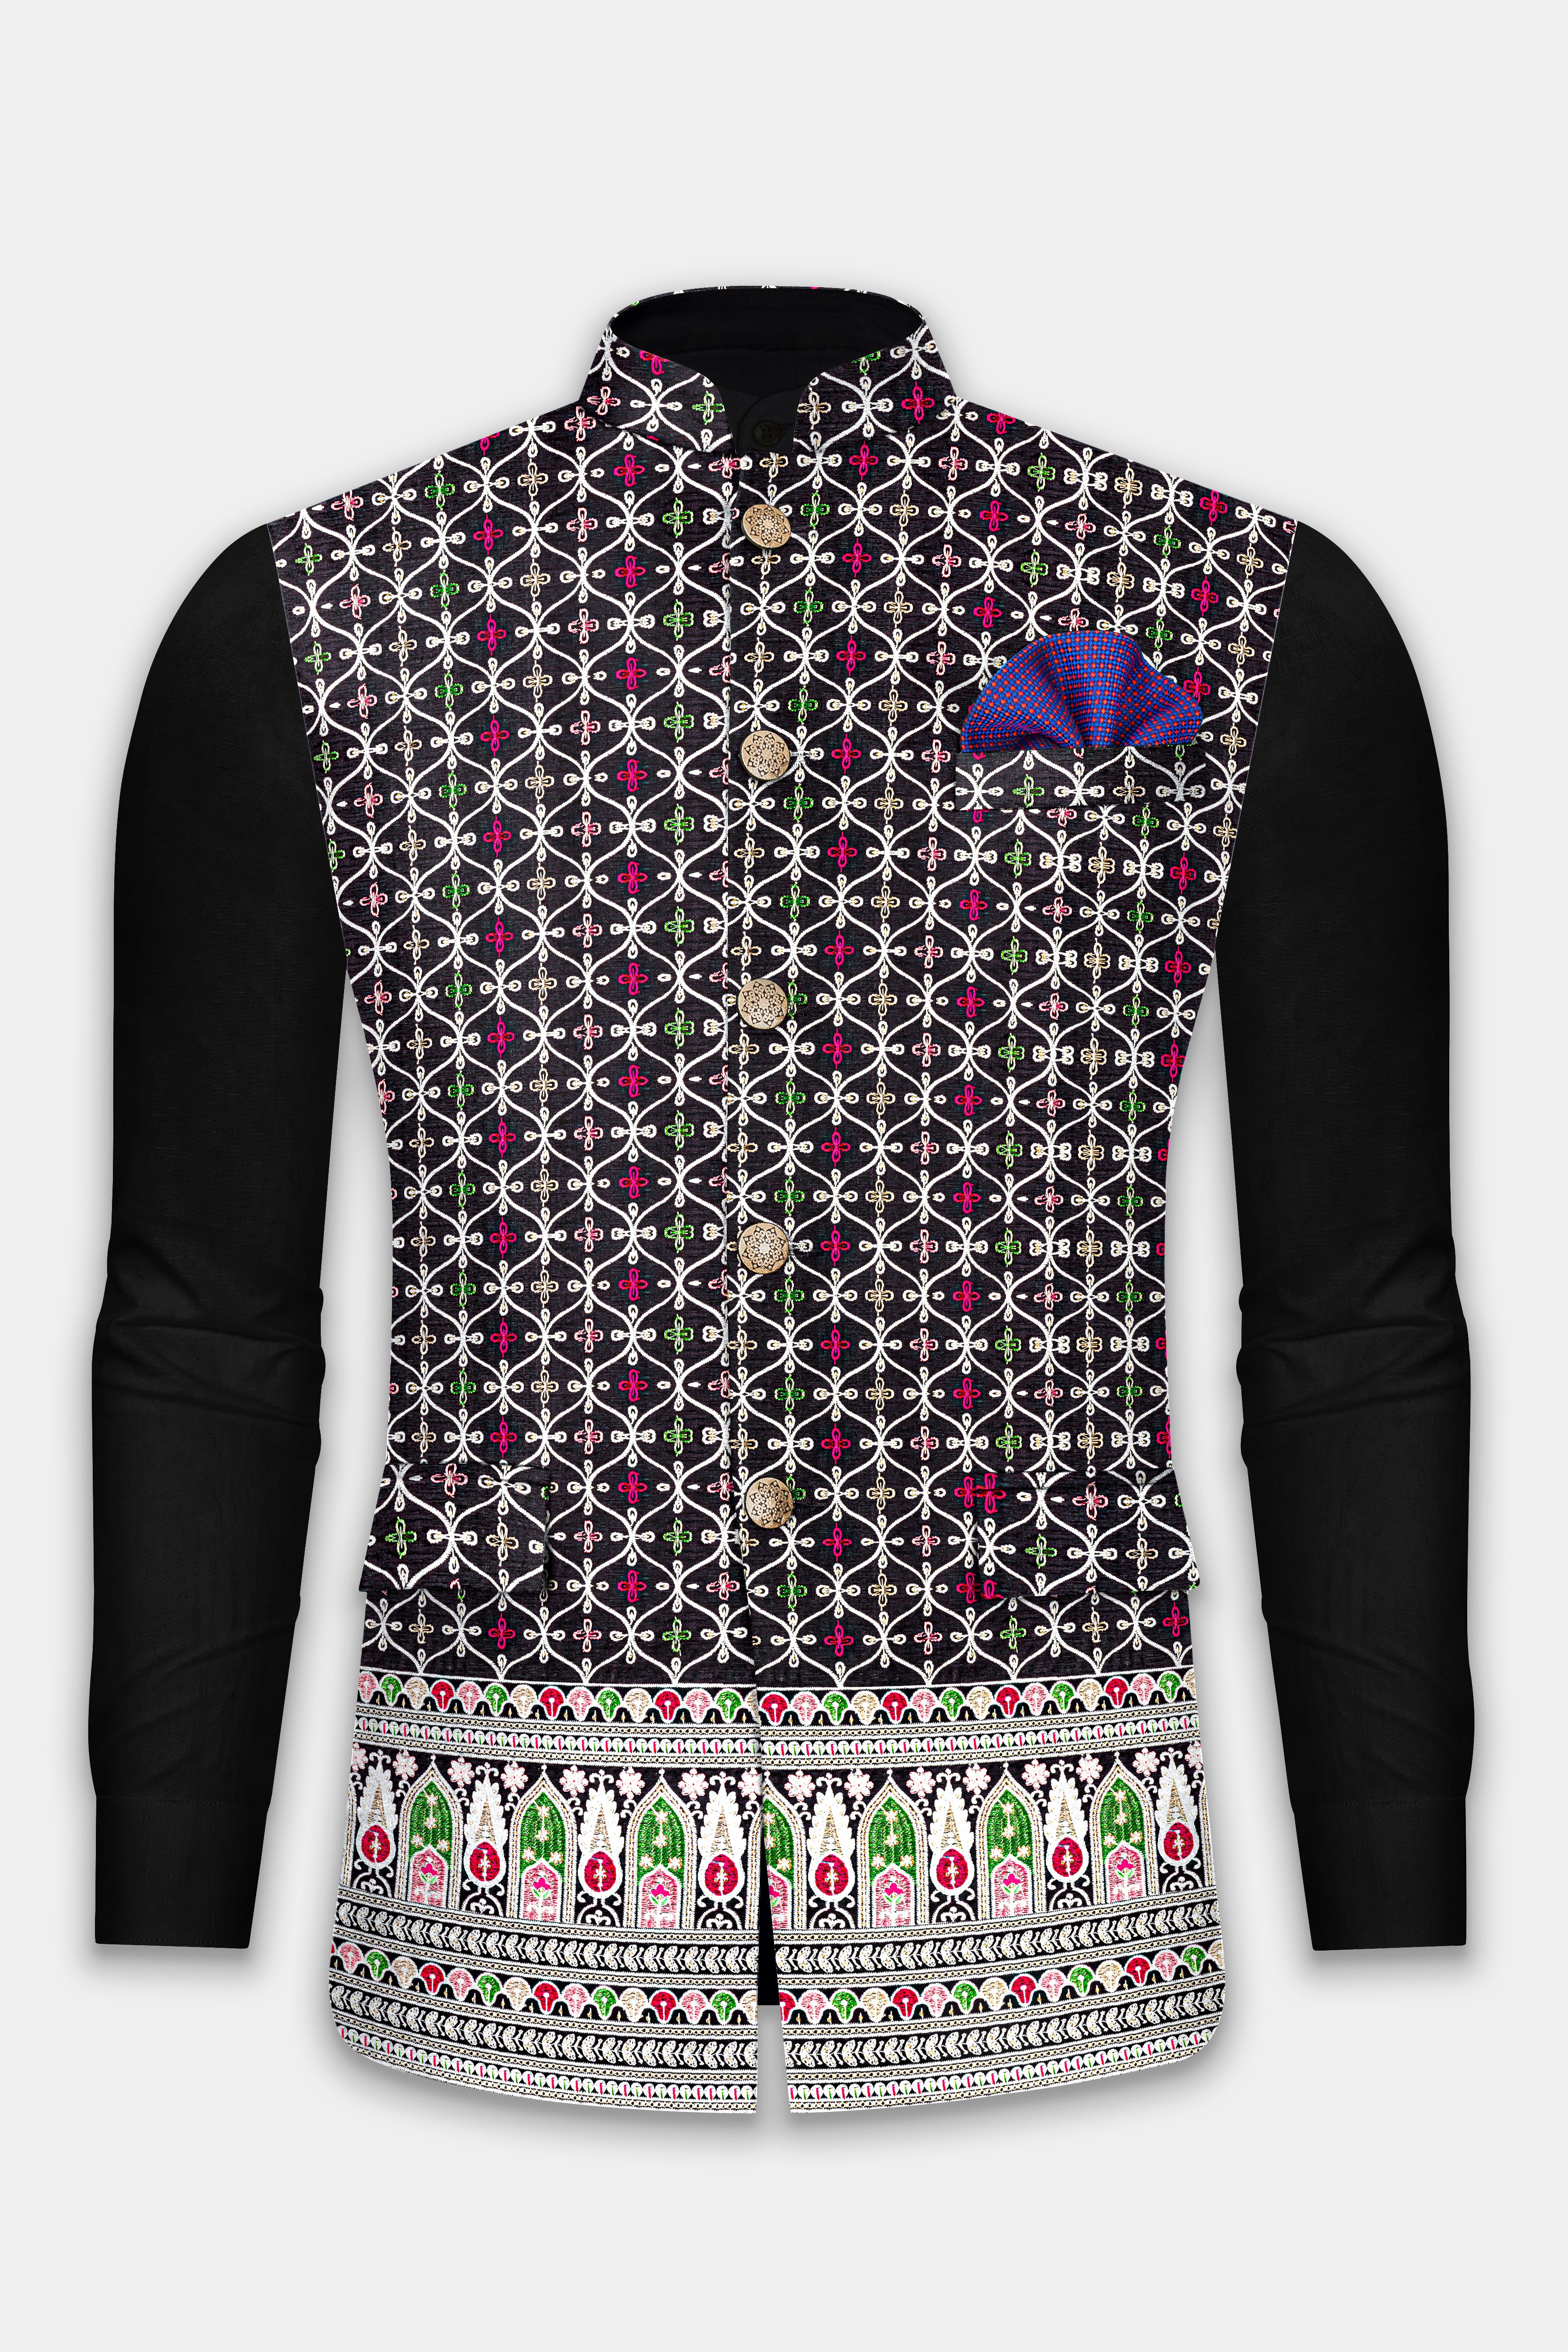 Jade Black and White Multicolour Ogee Pattern Embroidered Nehru Jacket WC3480-36,  WC3480-38,  WC3480-40,  WC3480-42,  WC3480-44,  WC3480-46,  WC3480-48,  WC3480-50,  WC3480-52,  WC3480-54,  WC3480-56,  WC3480-58,  WC3480-60